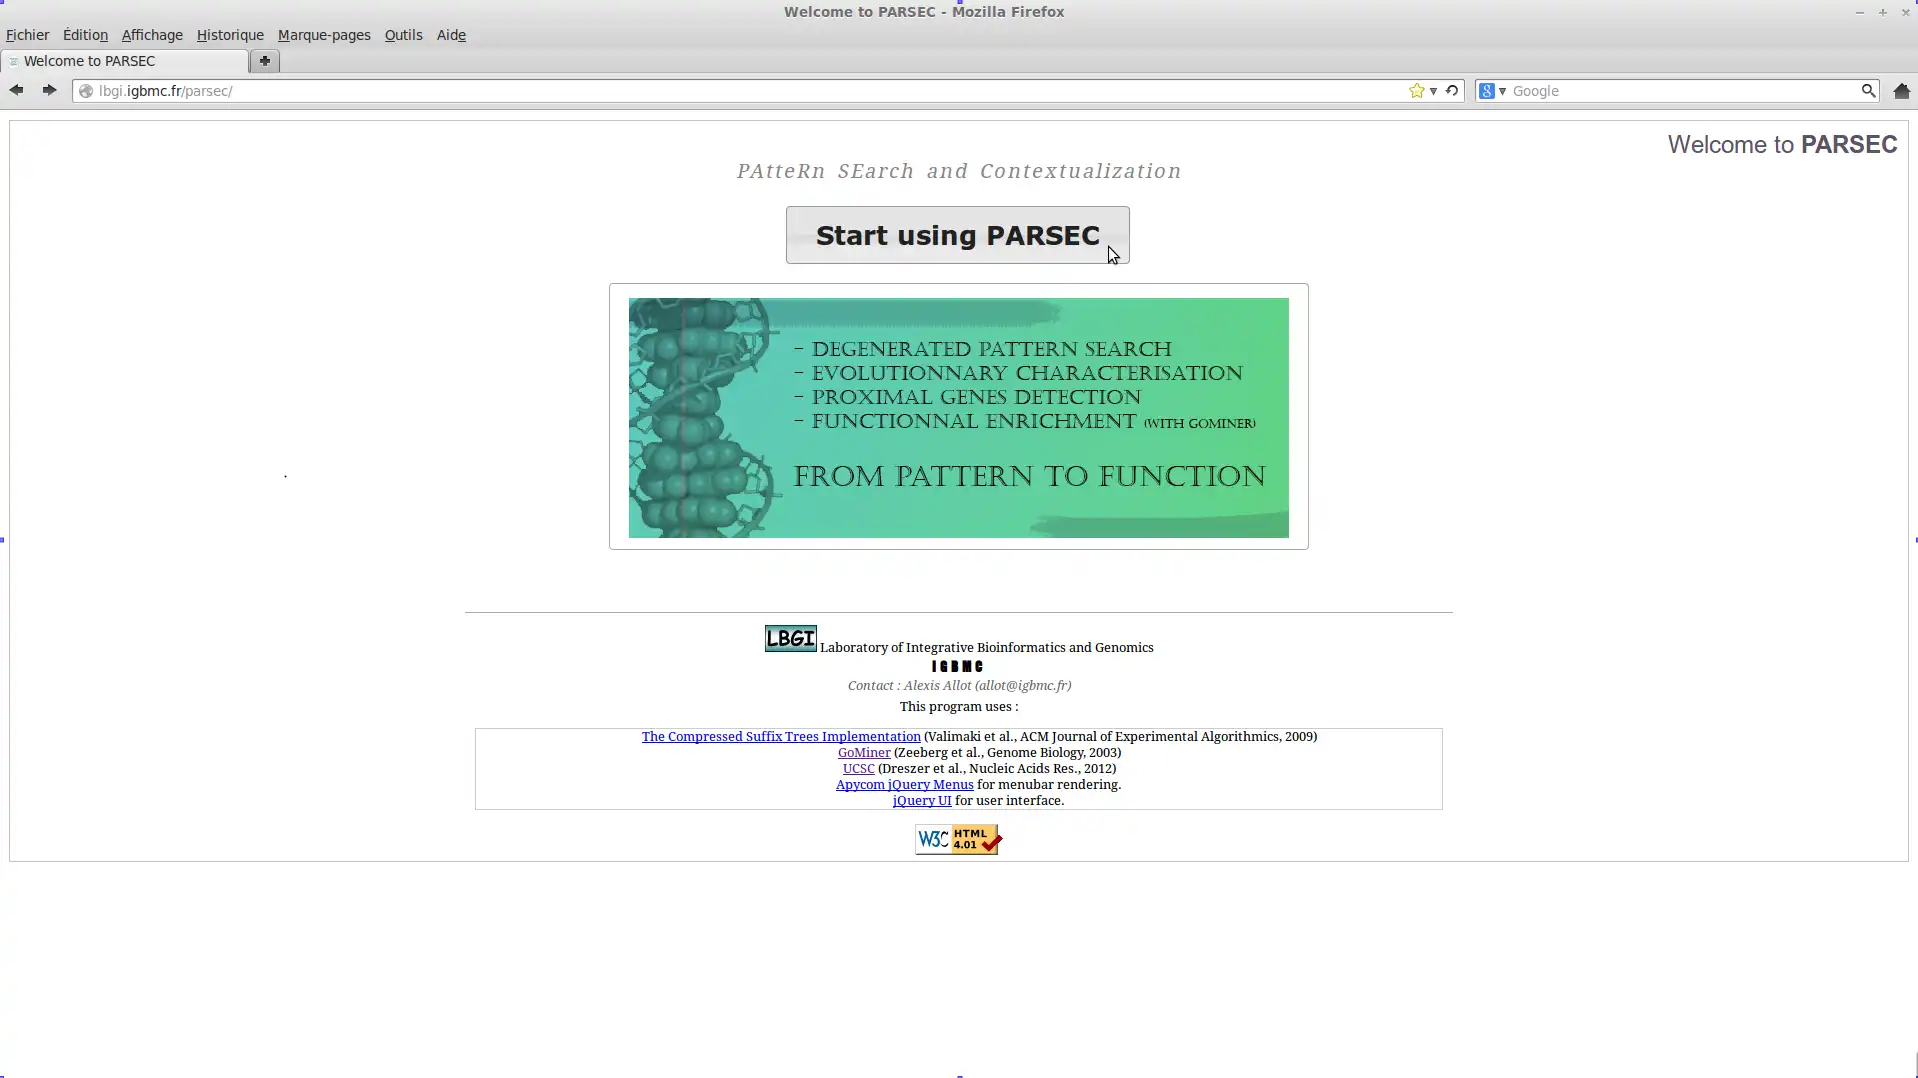 Download web tool or web app PARSEC - PAtteRn SEarch / Context to run in Linux online